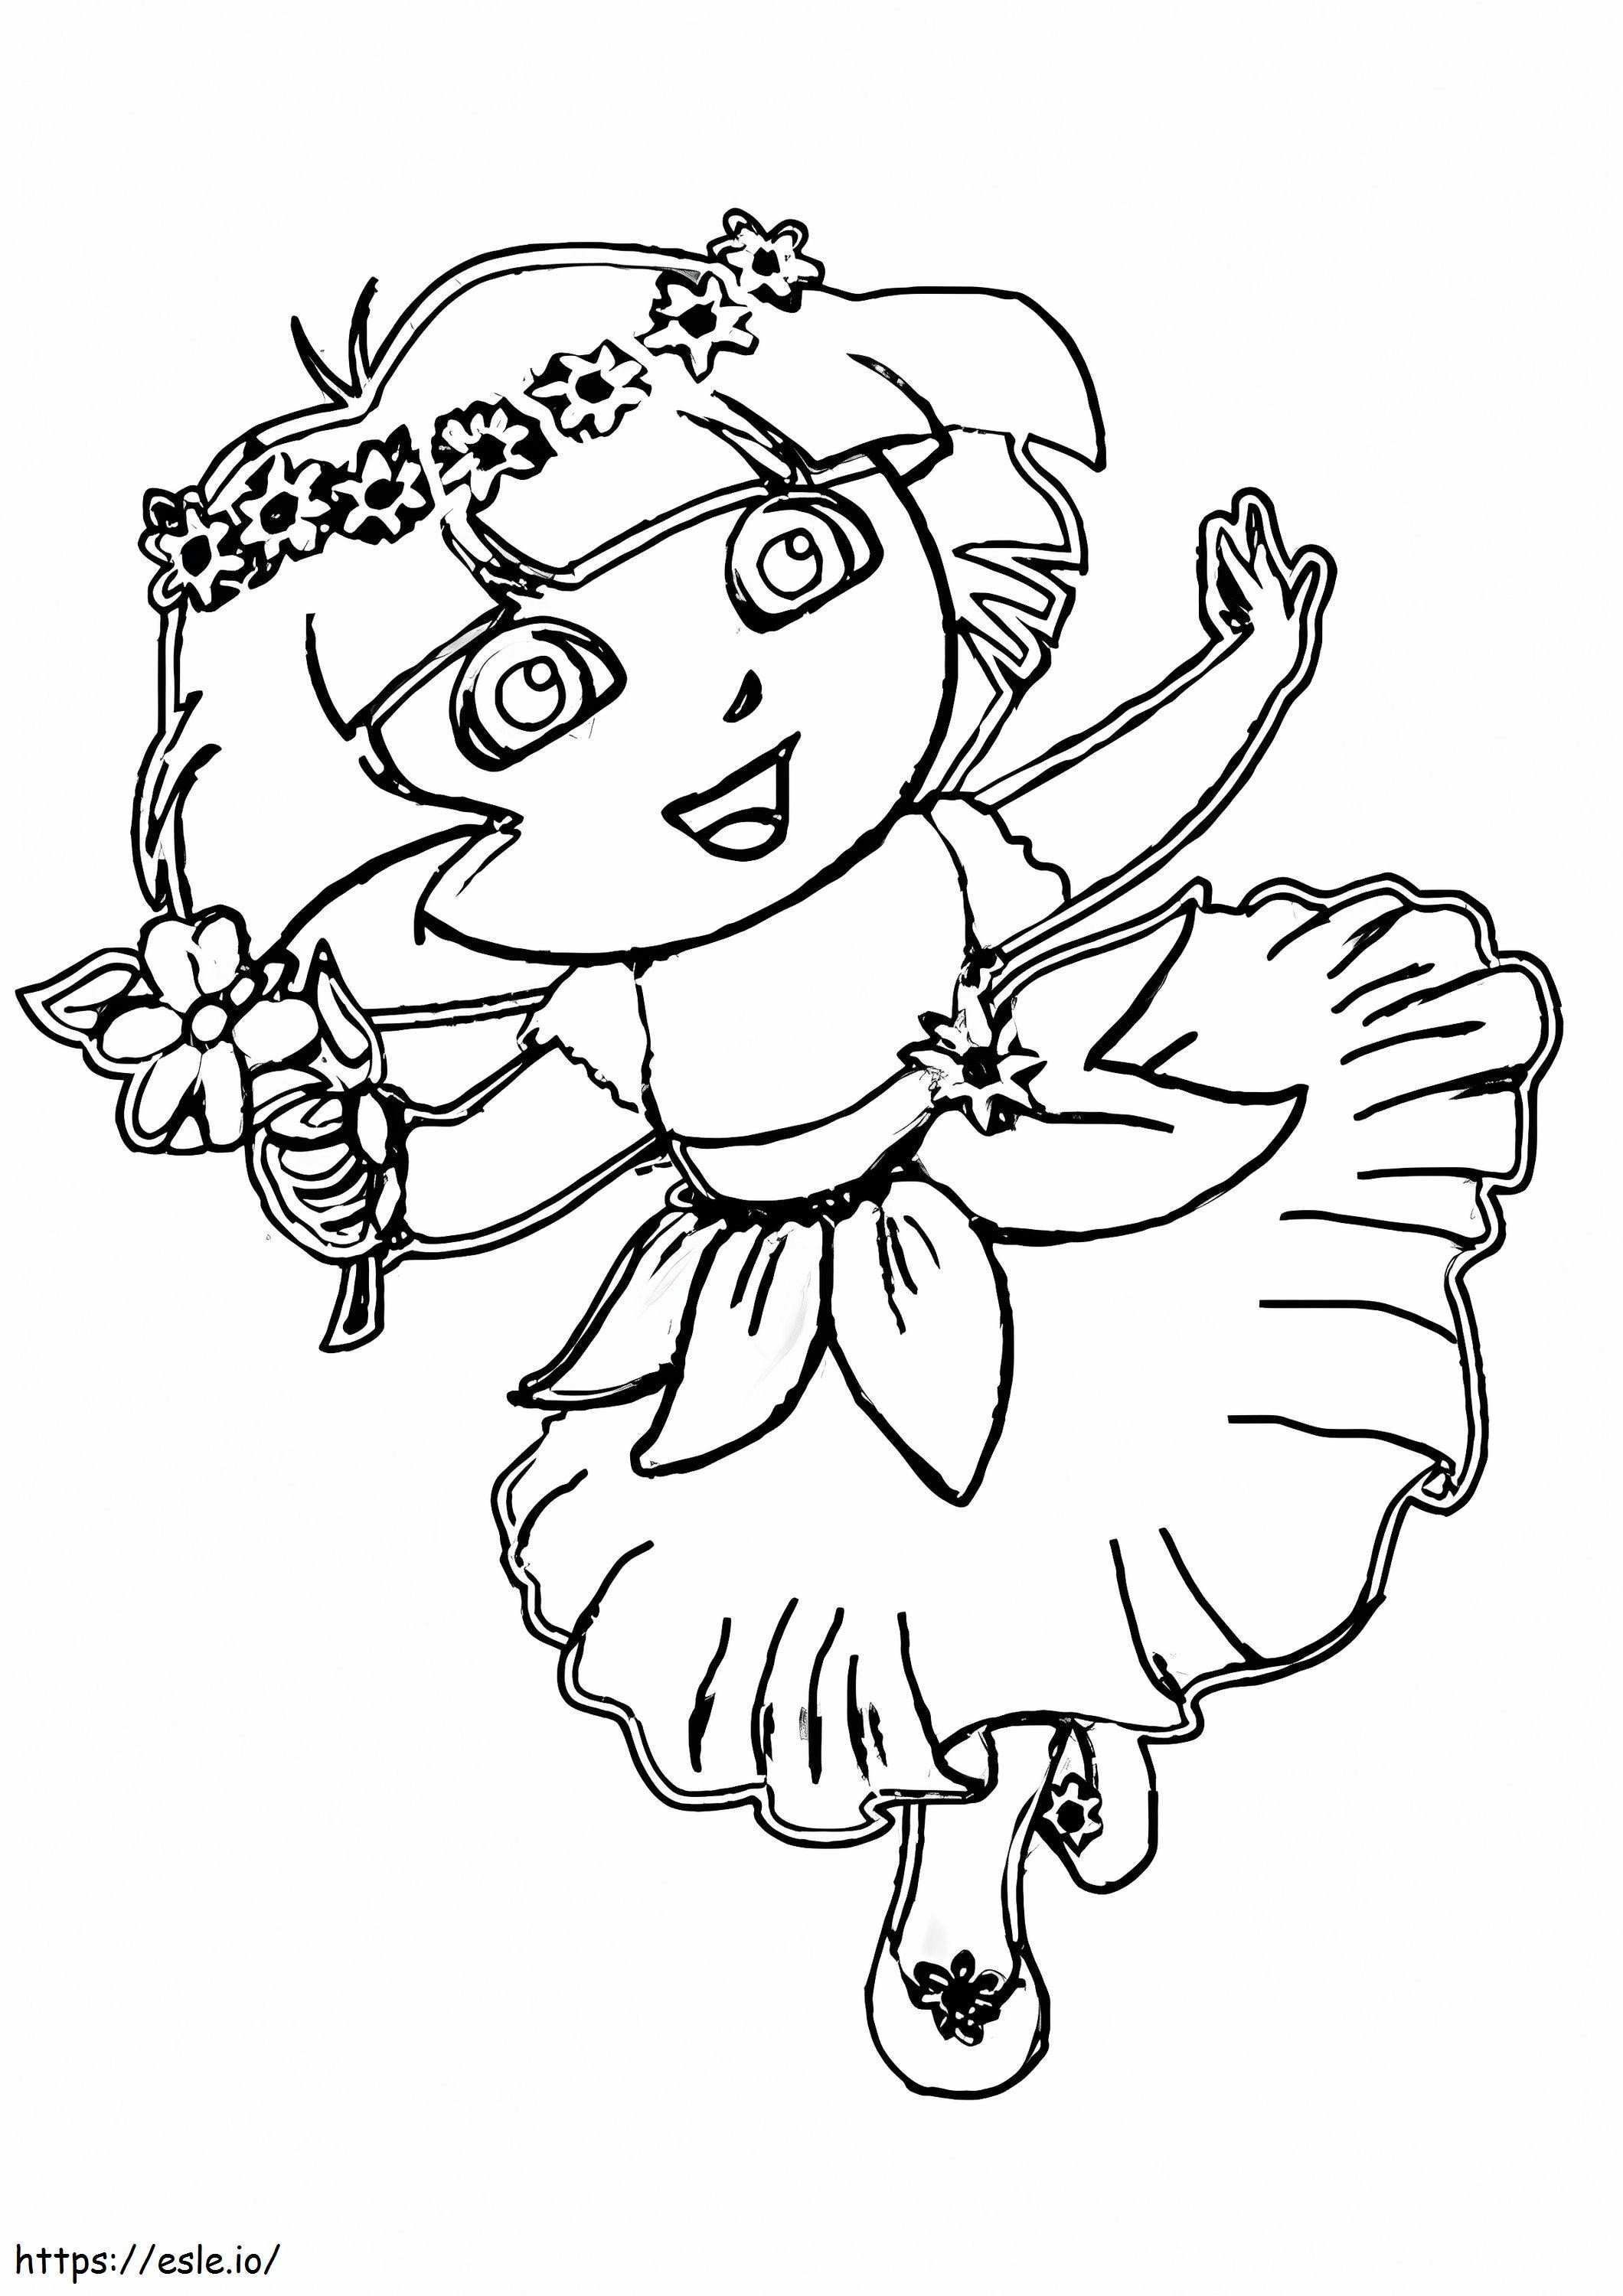 1591869652 Dora The Latino Girl A4 coloring page